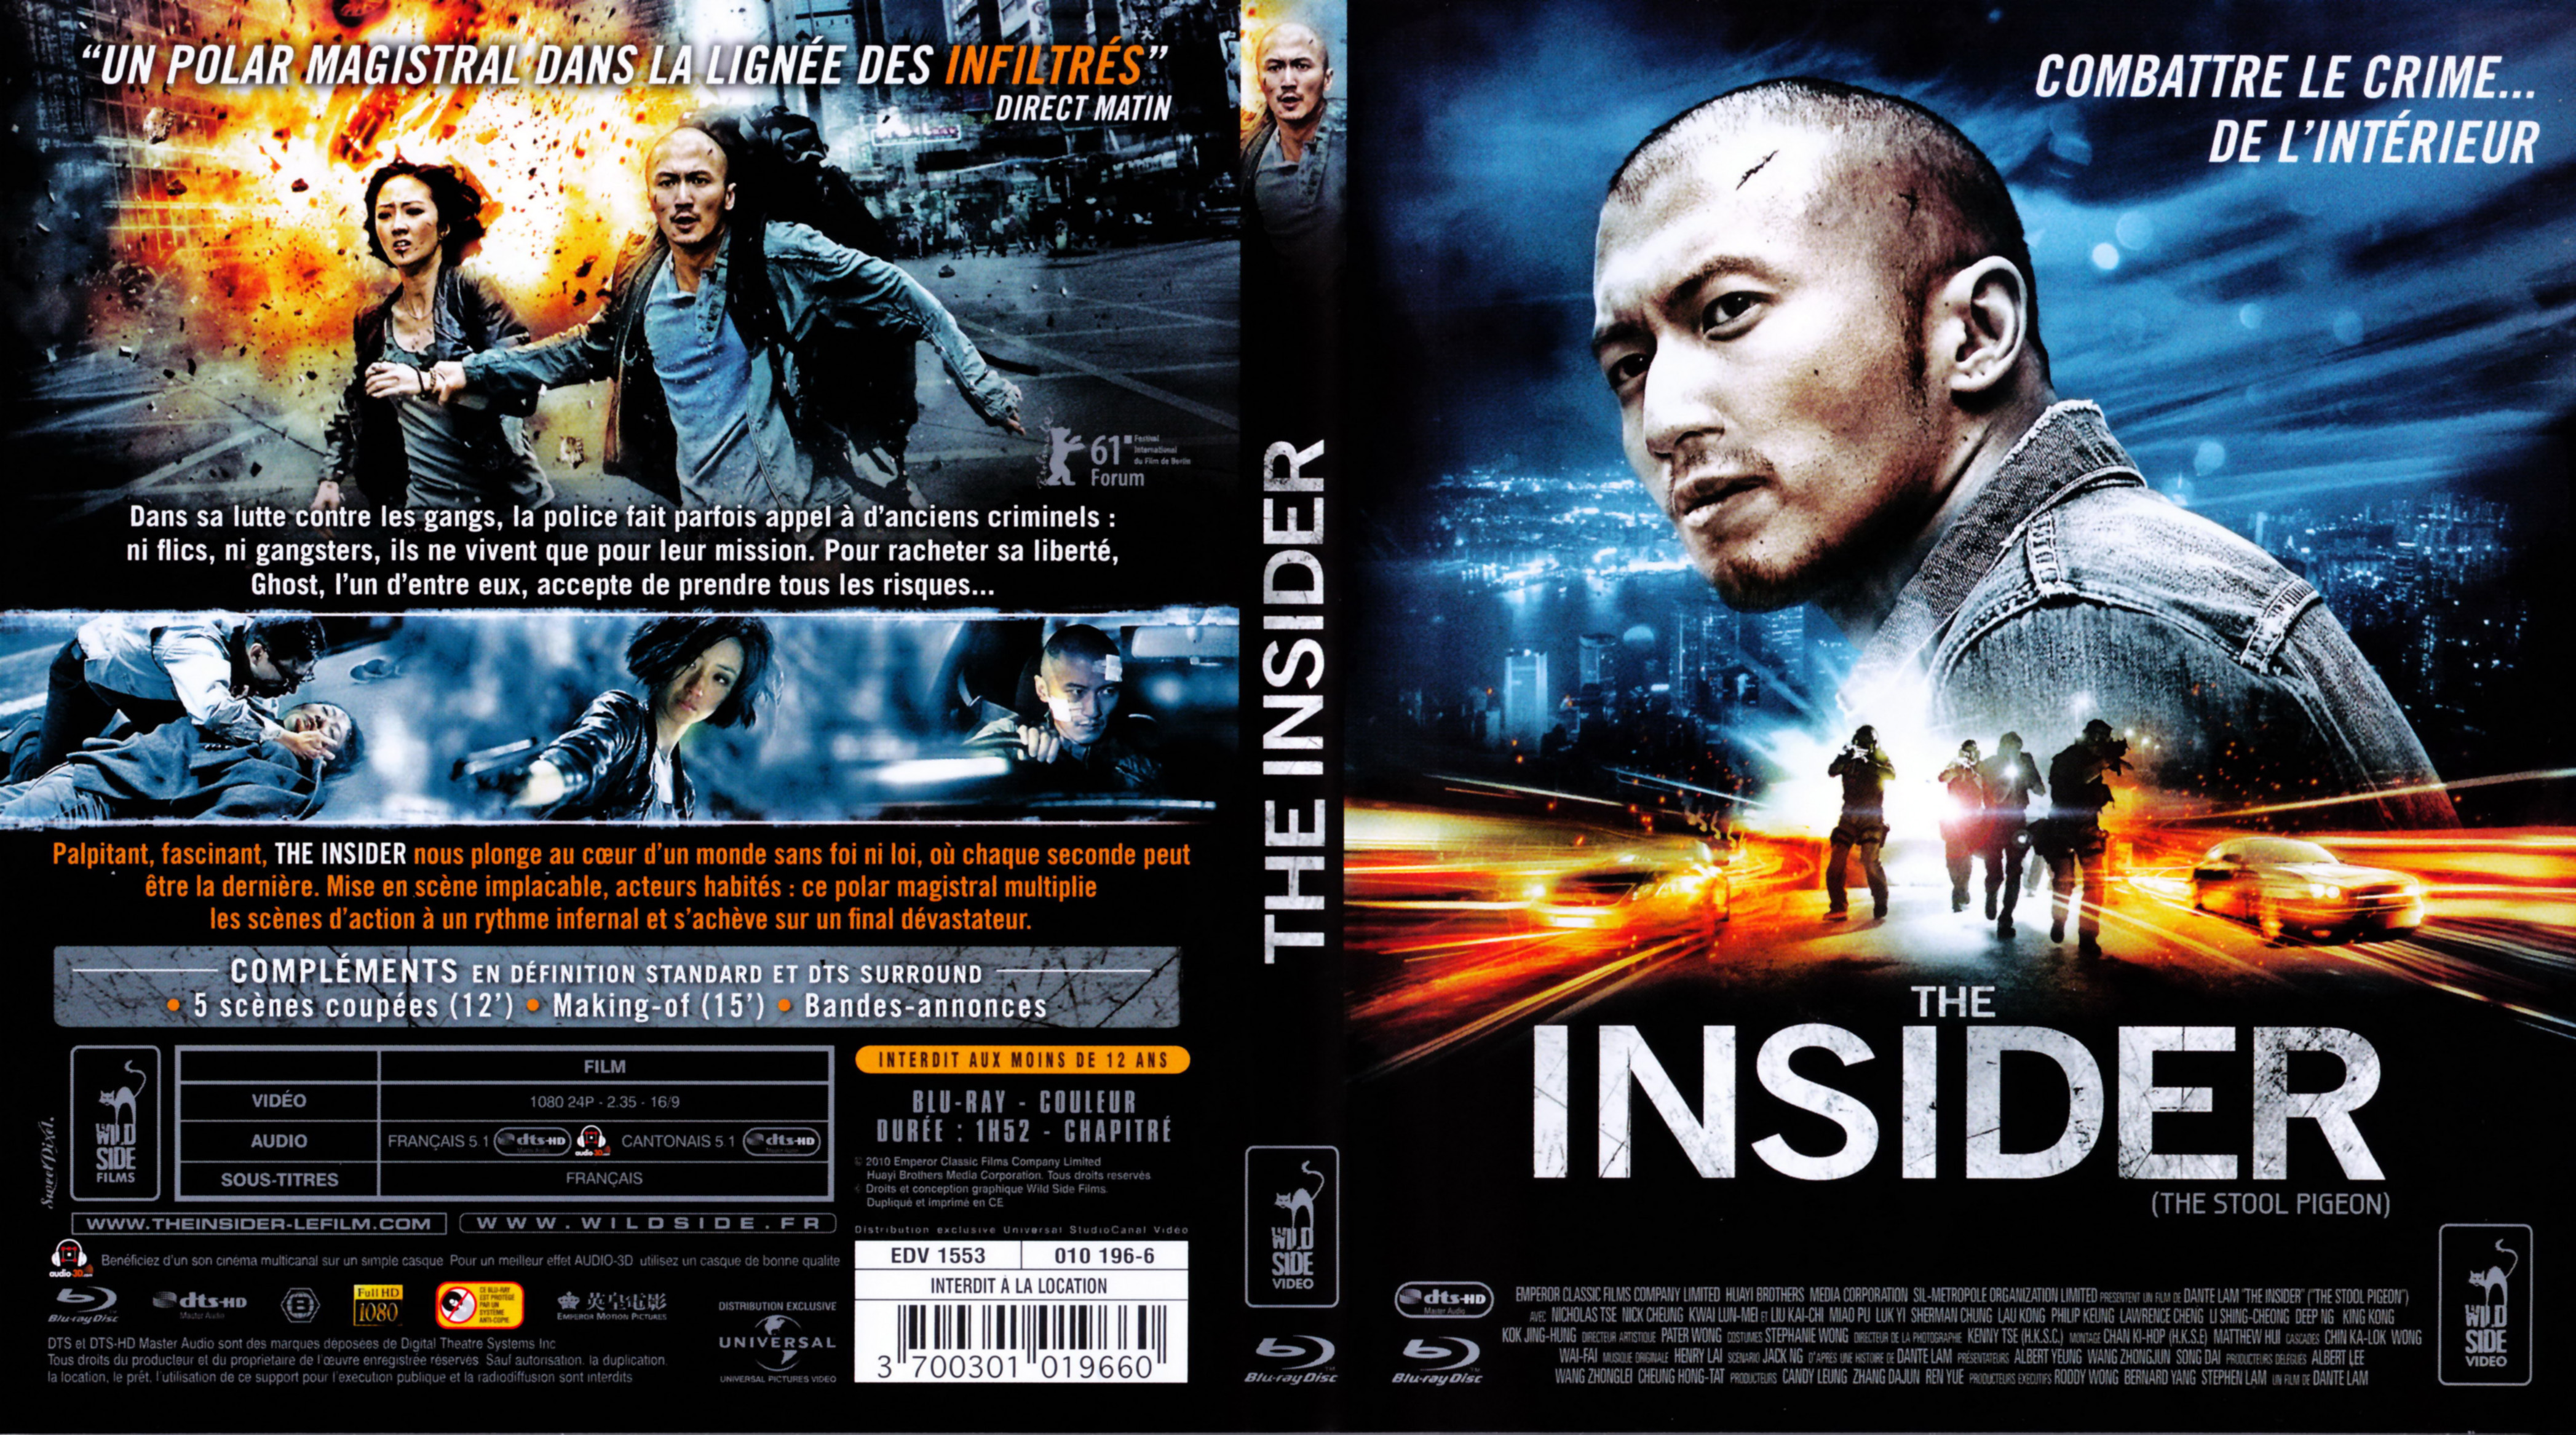 Jaquette DVD The insider (BLU-RAY)